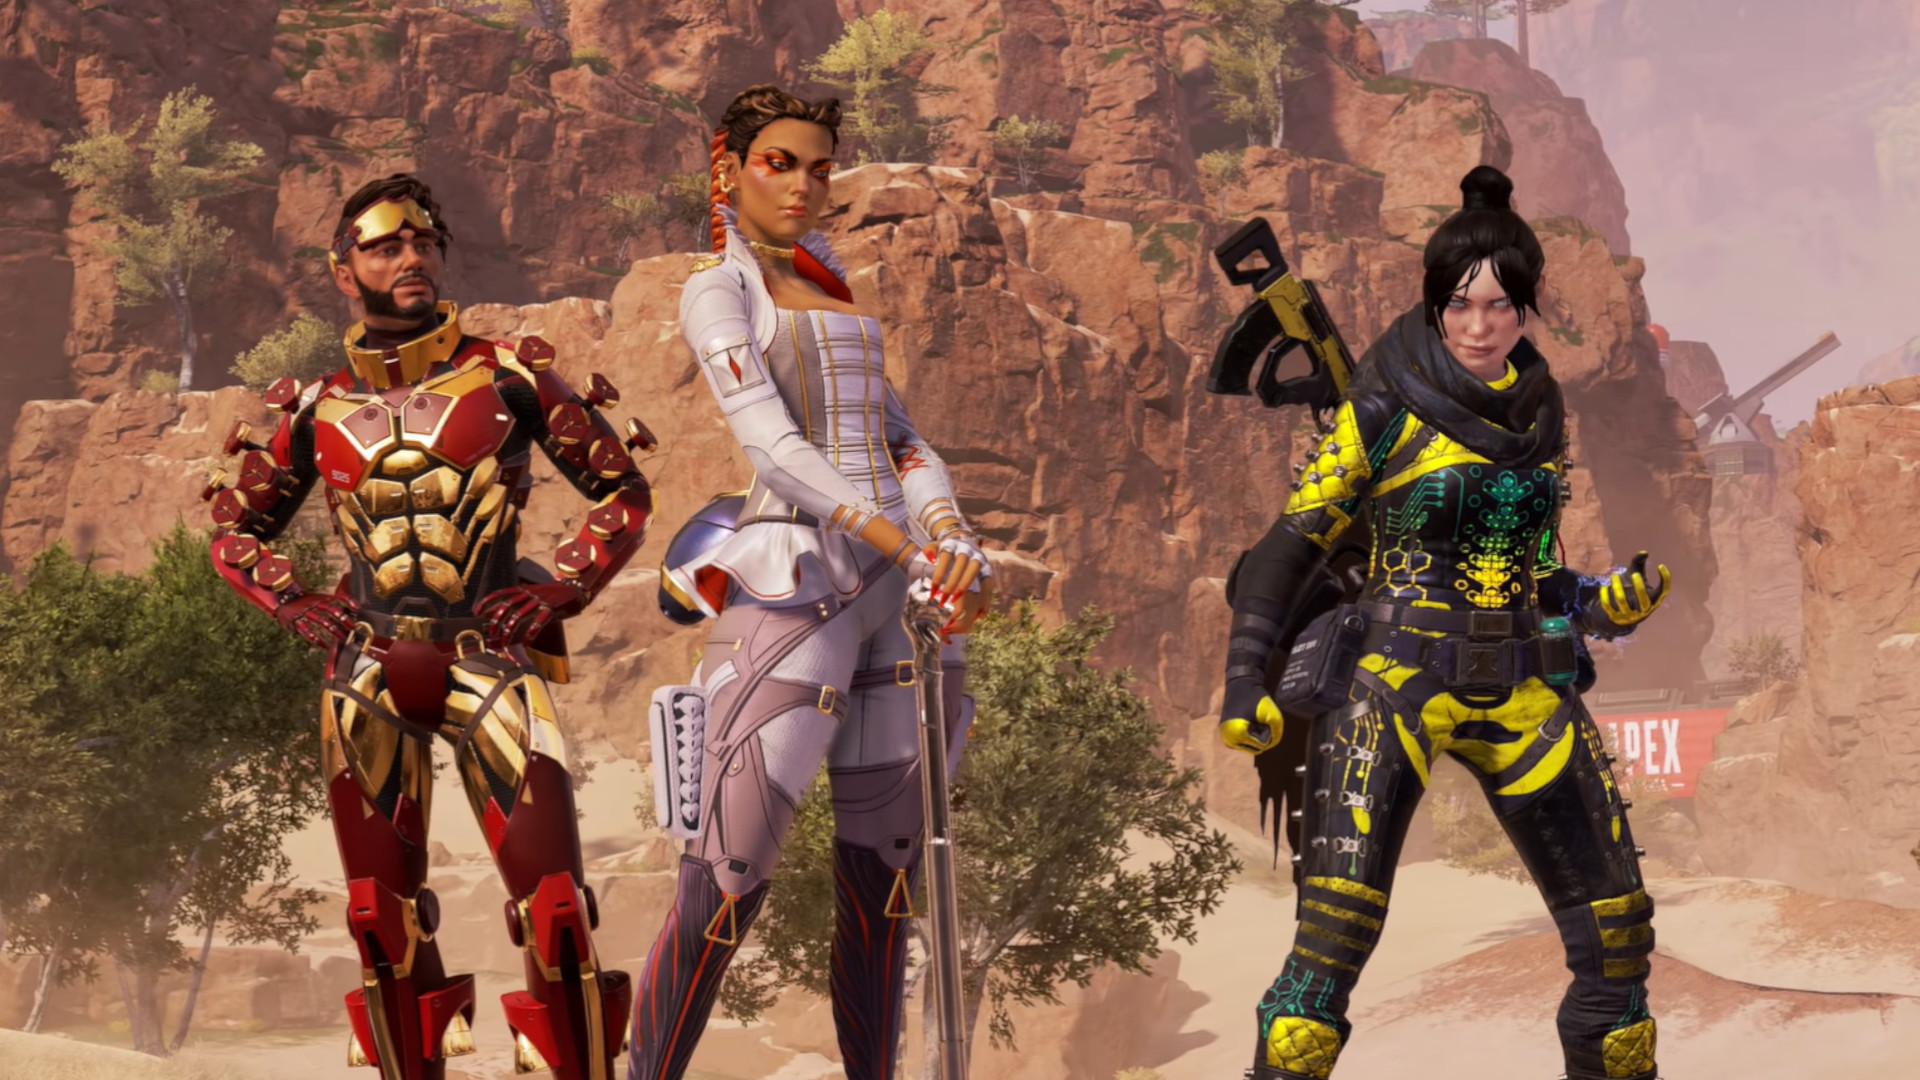 Apex Legends is more focused on character-vs-character combat than Titanfall ever was.